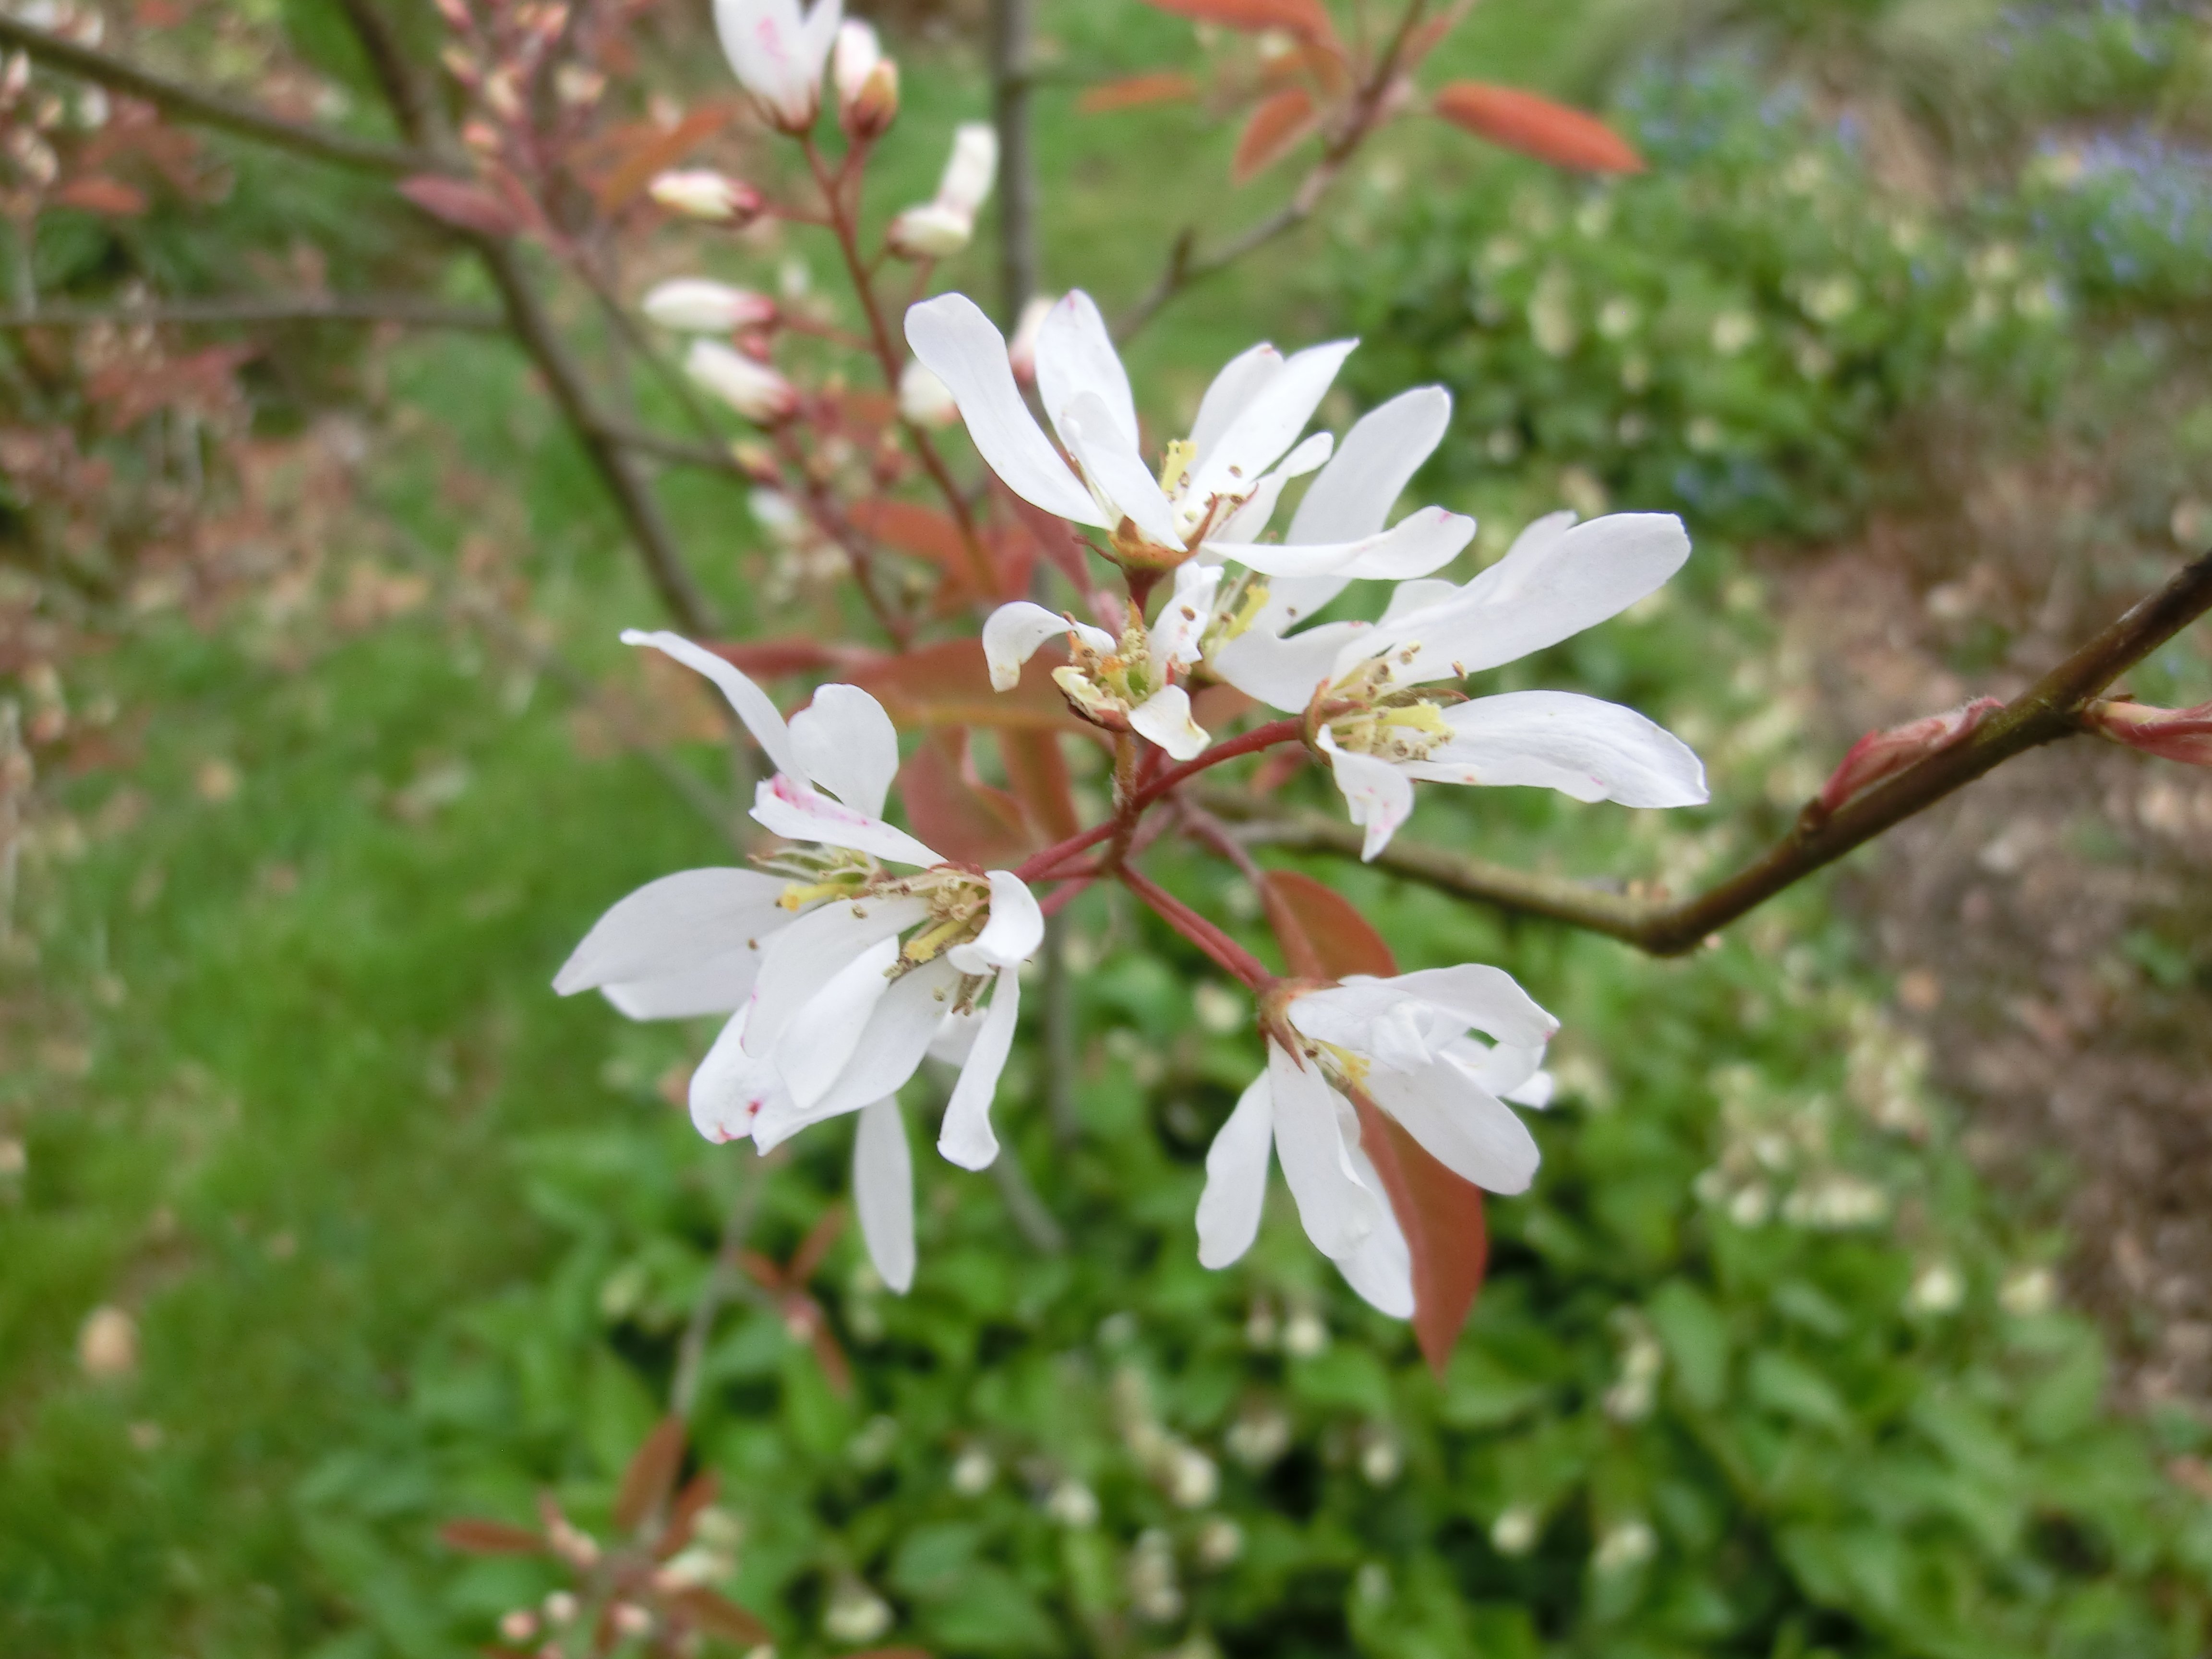 Spring blossom - and year round interest